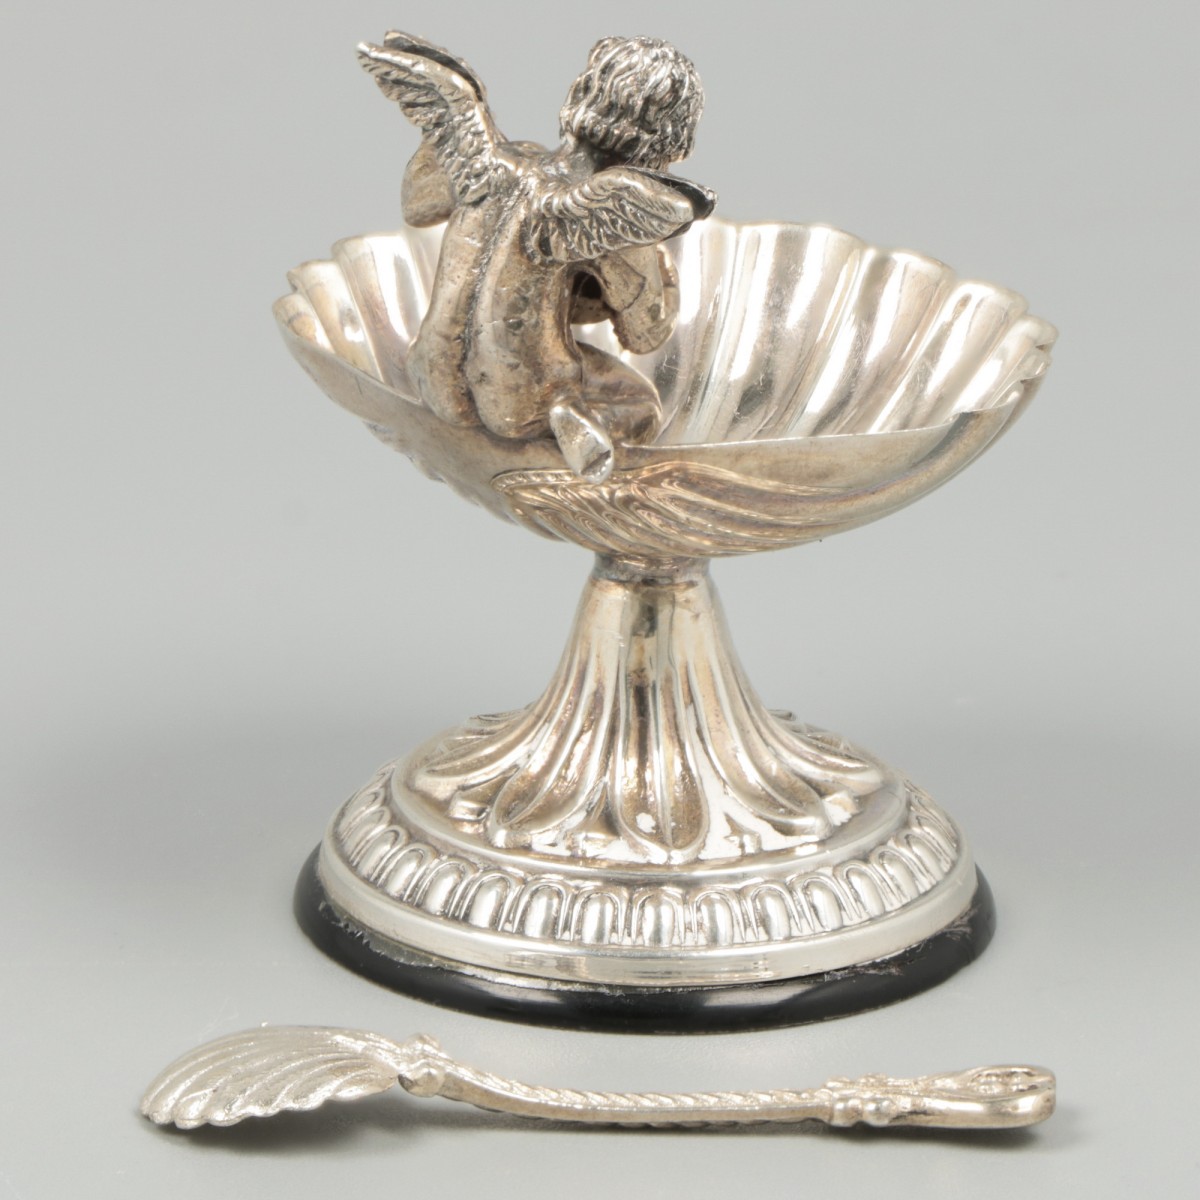 Salt cellar with spoon of silver. - Image 3 of 6